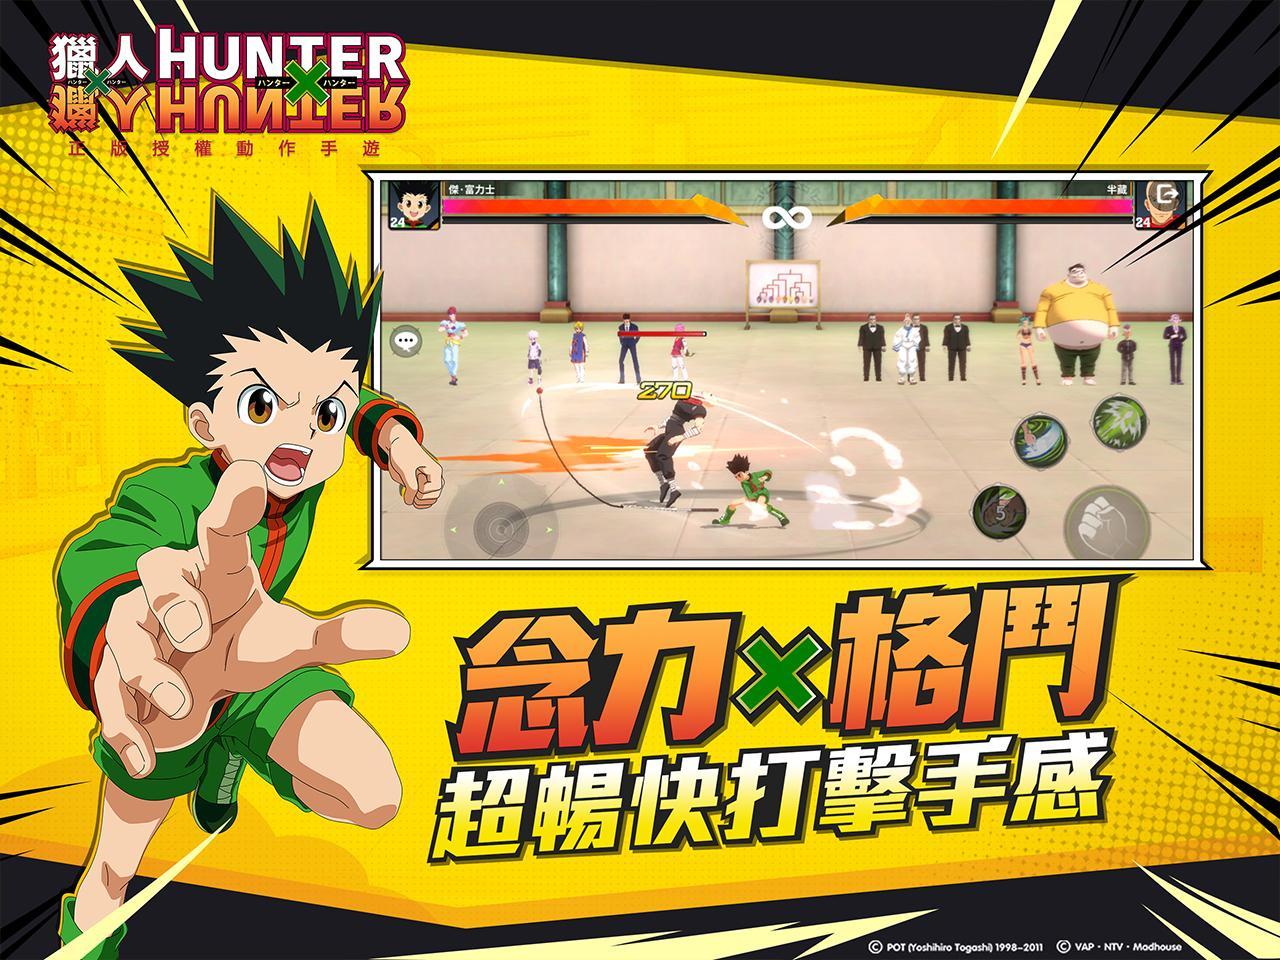 Qoo News] Mobile game HUNTERxHUNTER World Hunt is now available on Android